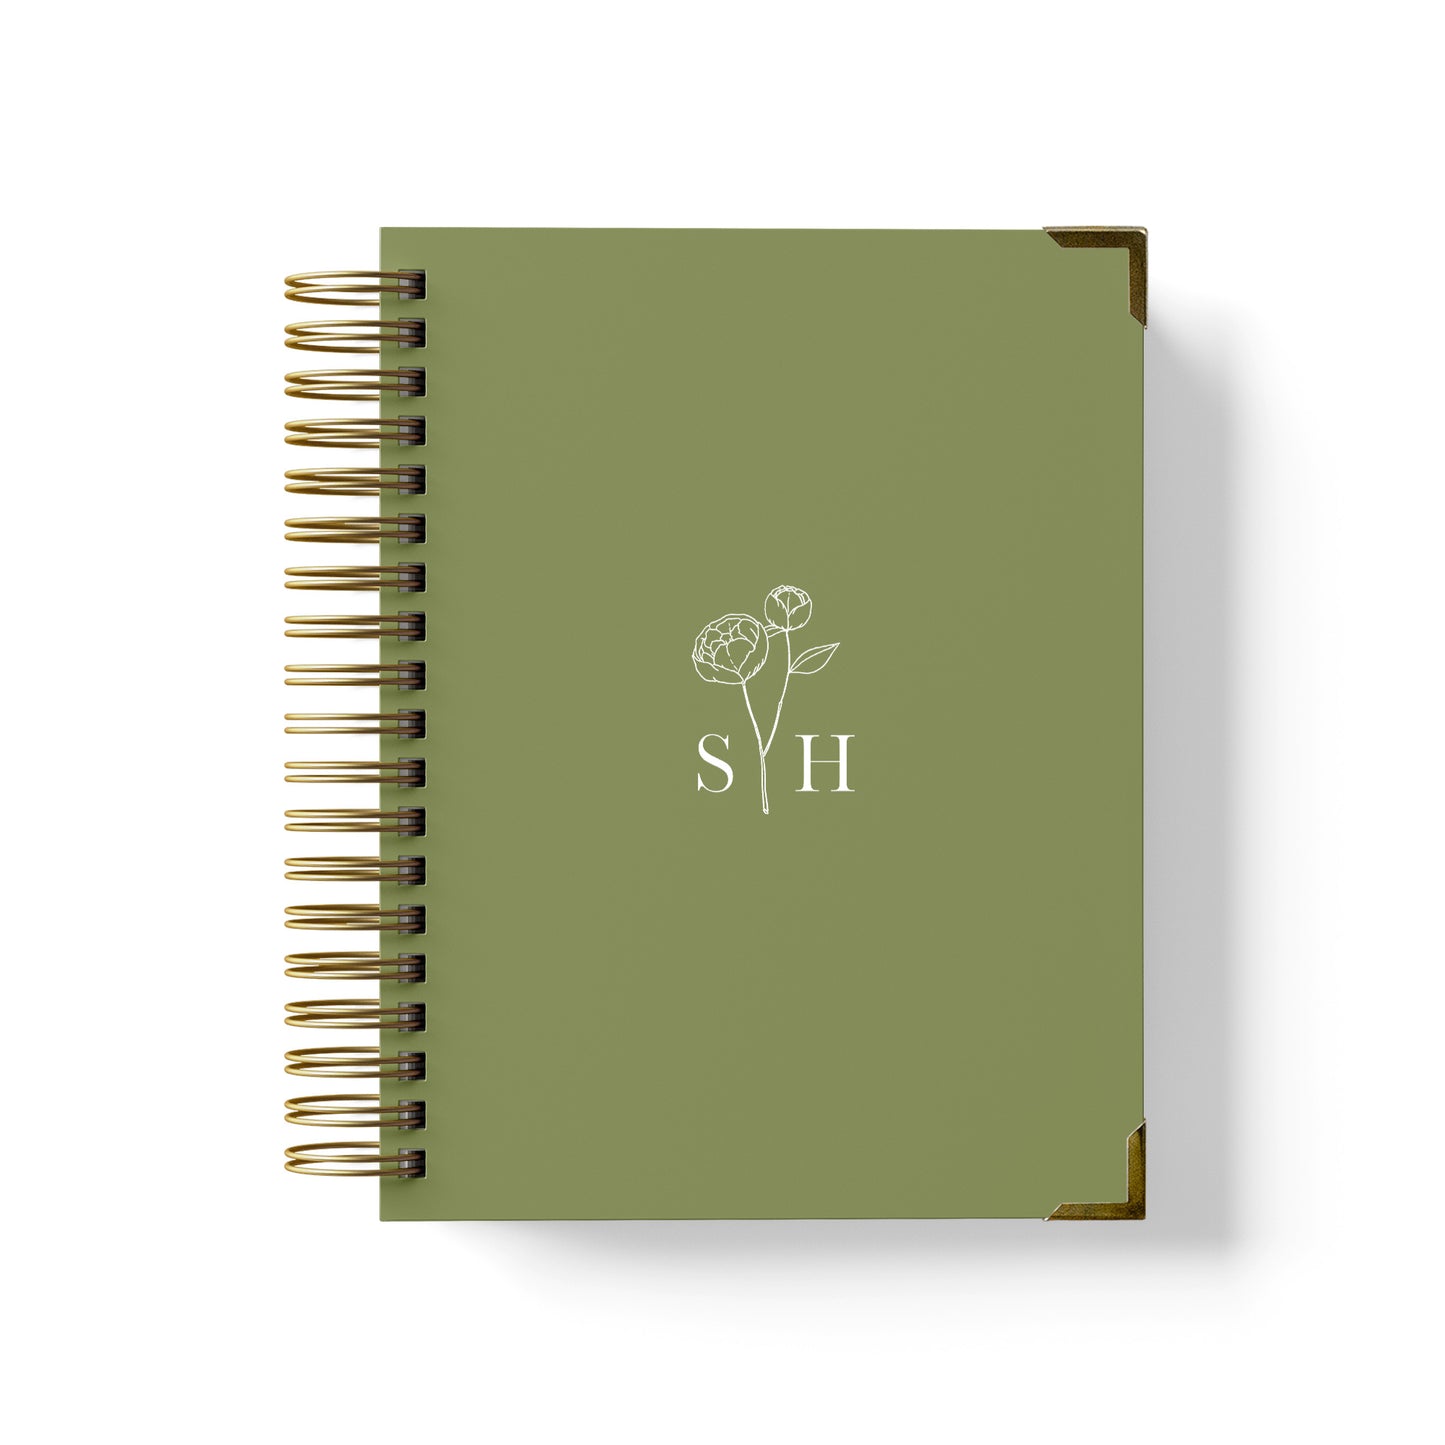 Our LGBT wedding planner books are all-inclusive and gender-neutral, shown in a delicate peony monogram design